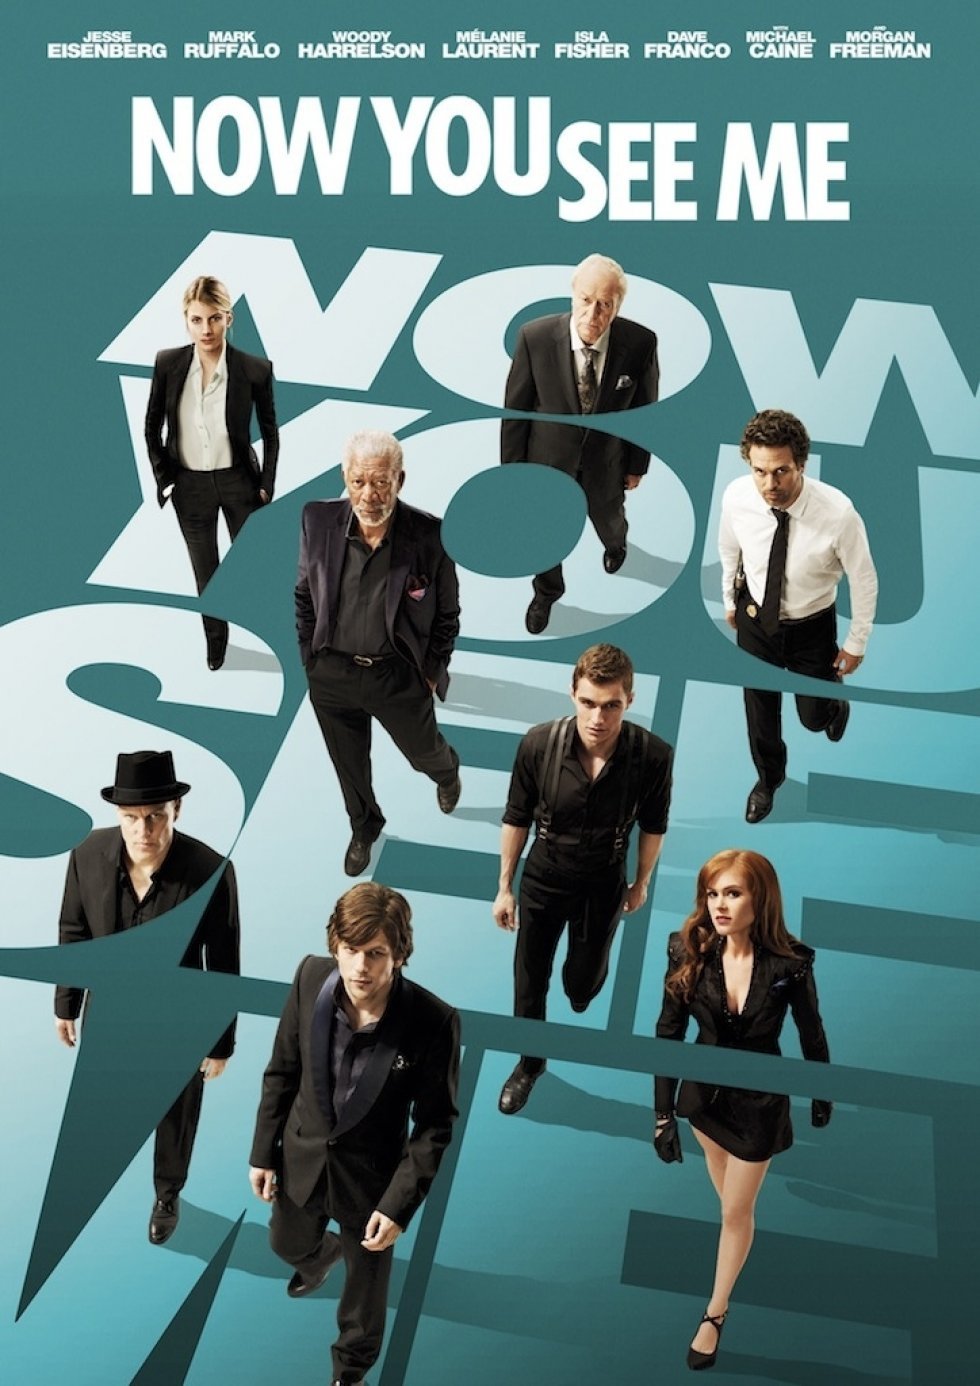 [Anmeldelse]: Now you see me